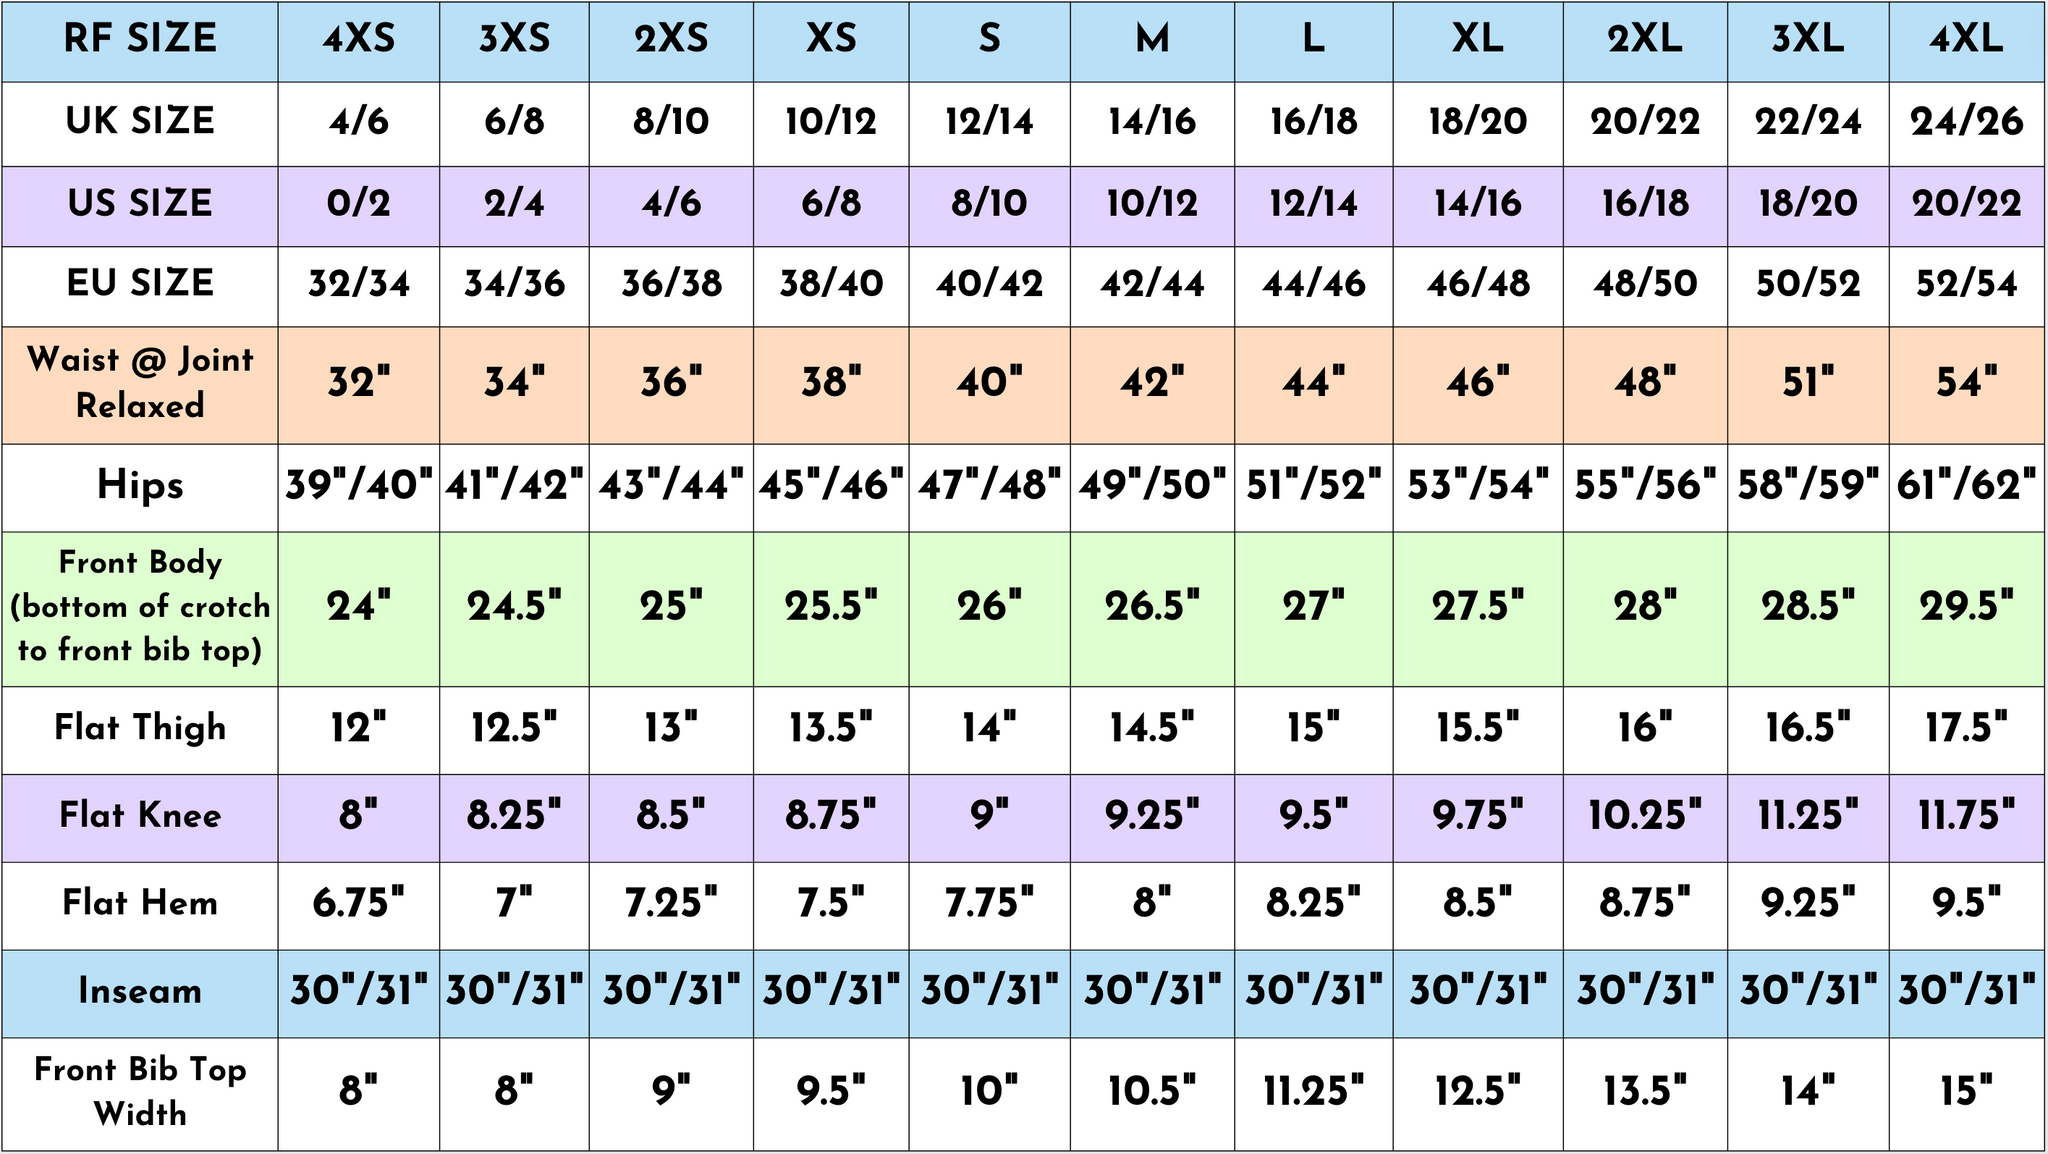 Size chart size guide measurements in inches of the Run and Fly 90s arcade stretch twill dungarees.